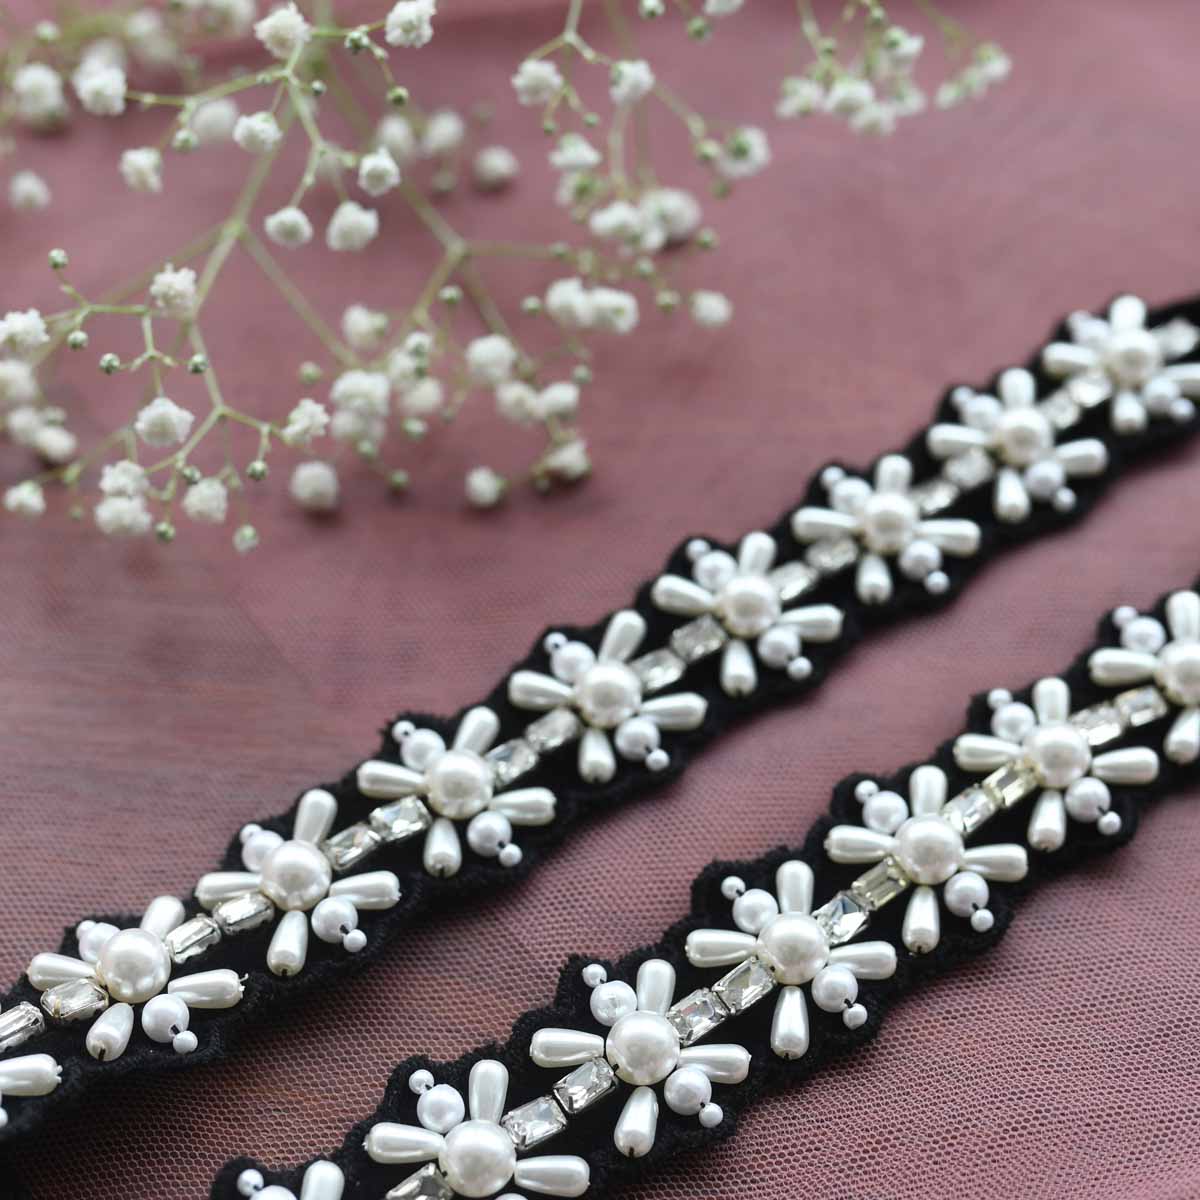 Embroidered Tie up Headband with Pearl Flowers